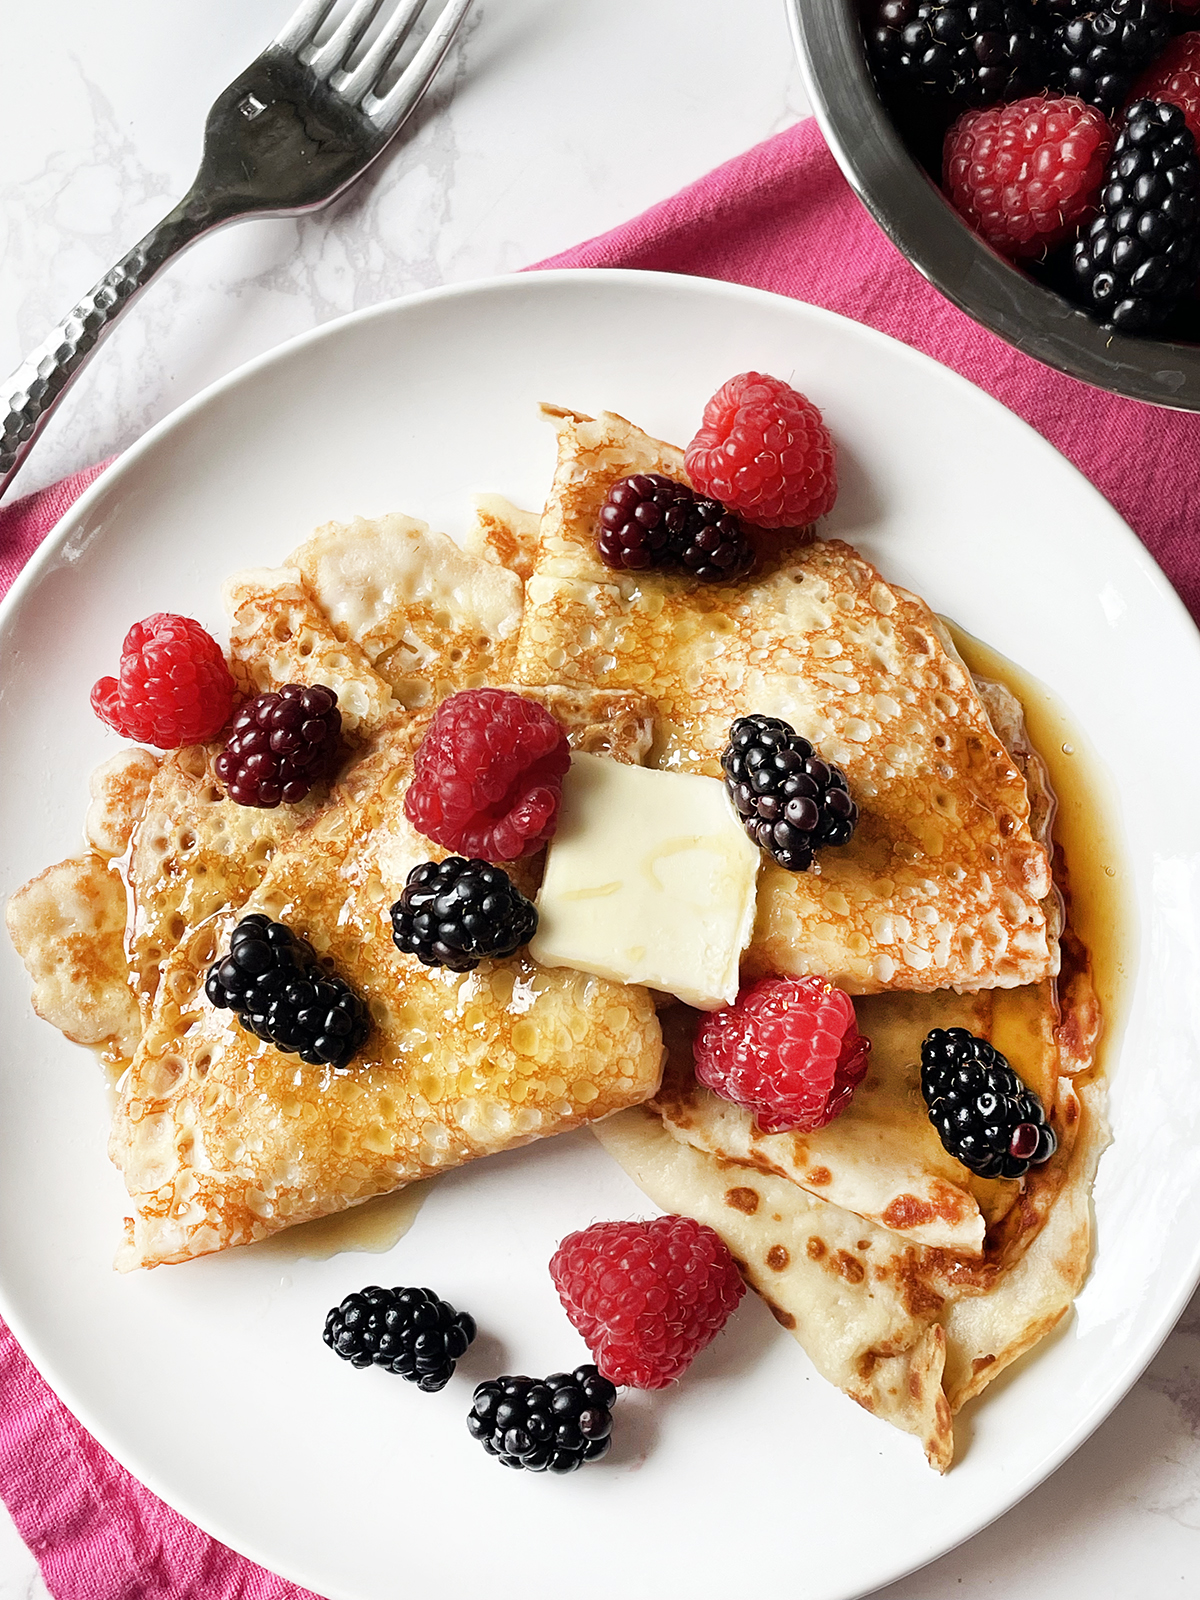 Top view of a plate of crepes topped with syrup and berries.